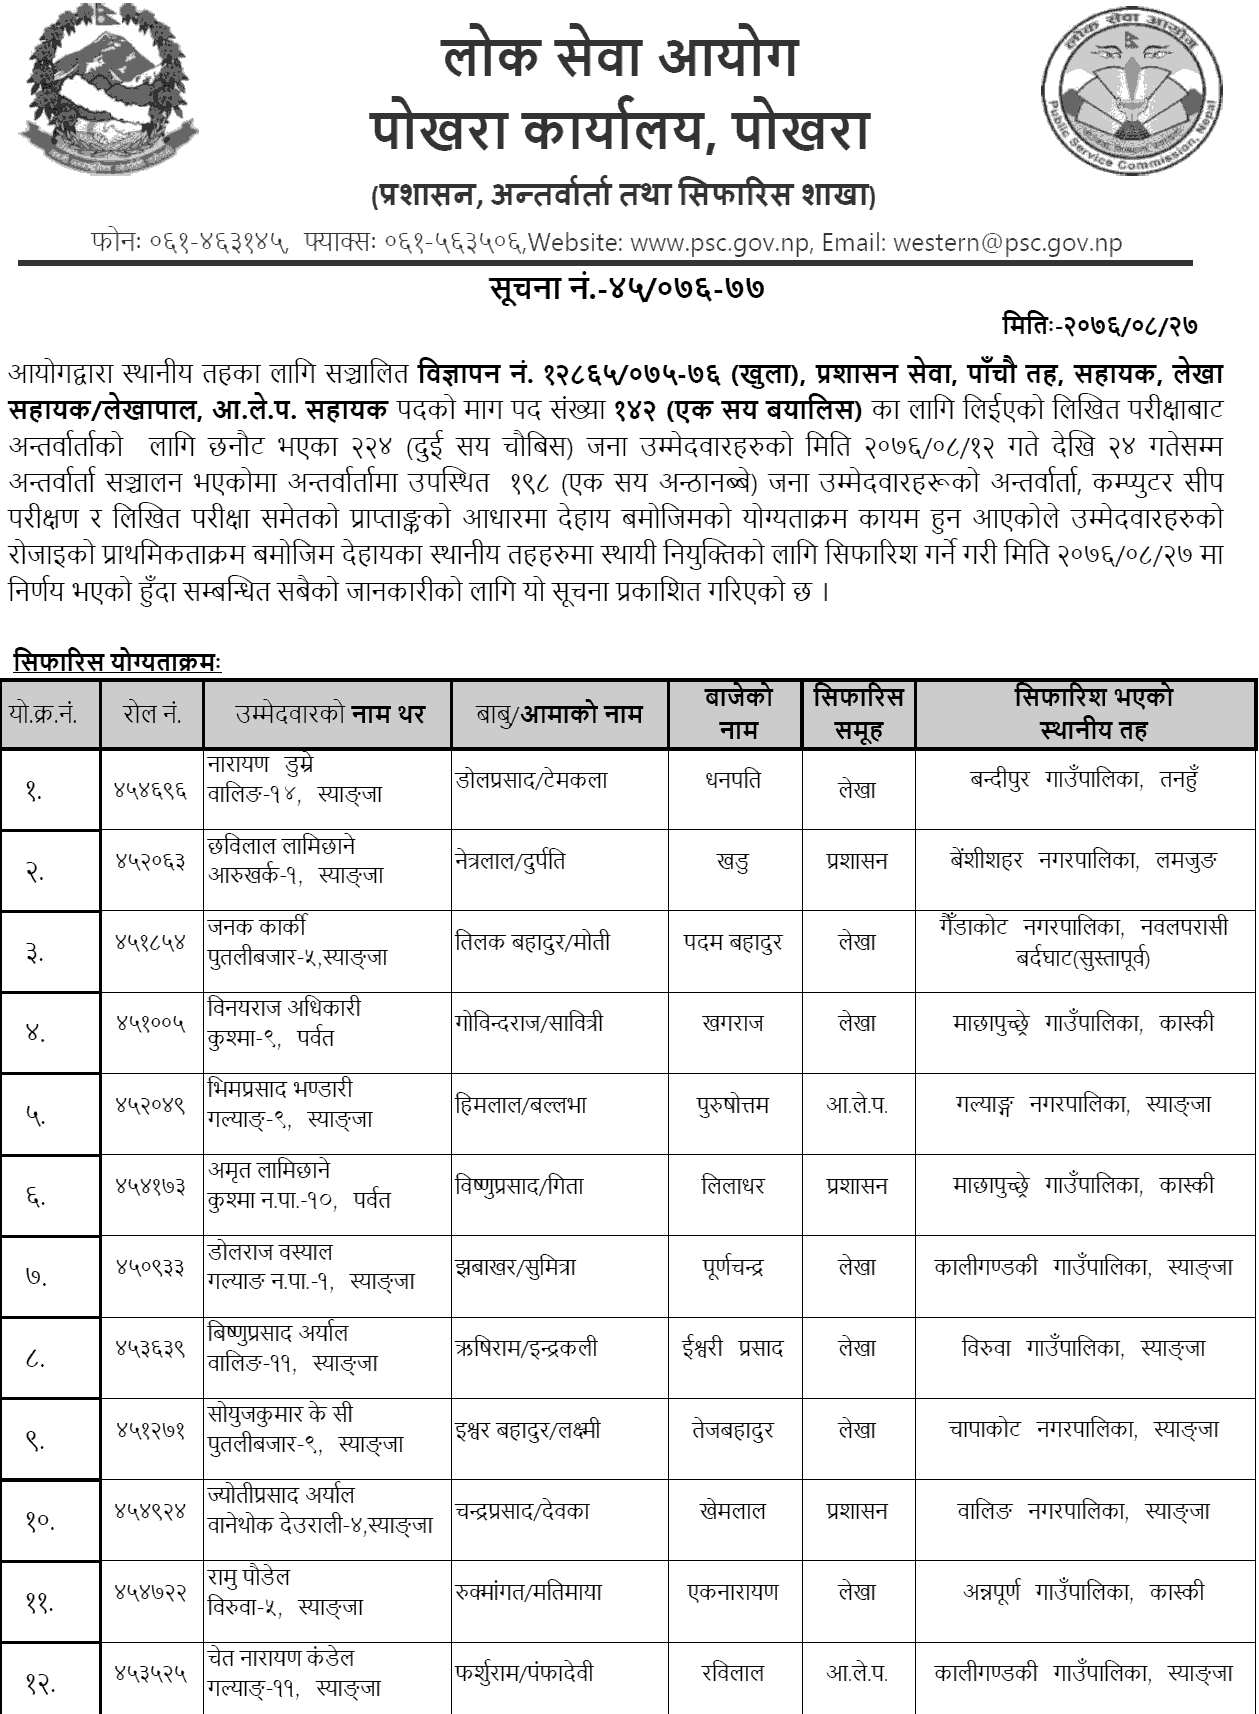 Lok Sewa Aayog Pokhara Local Level 5th Level Final Result and Recommendations